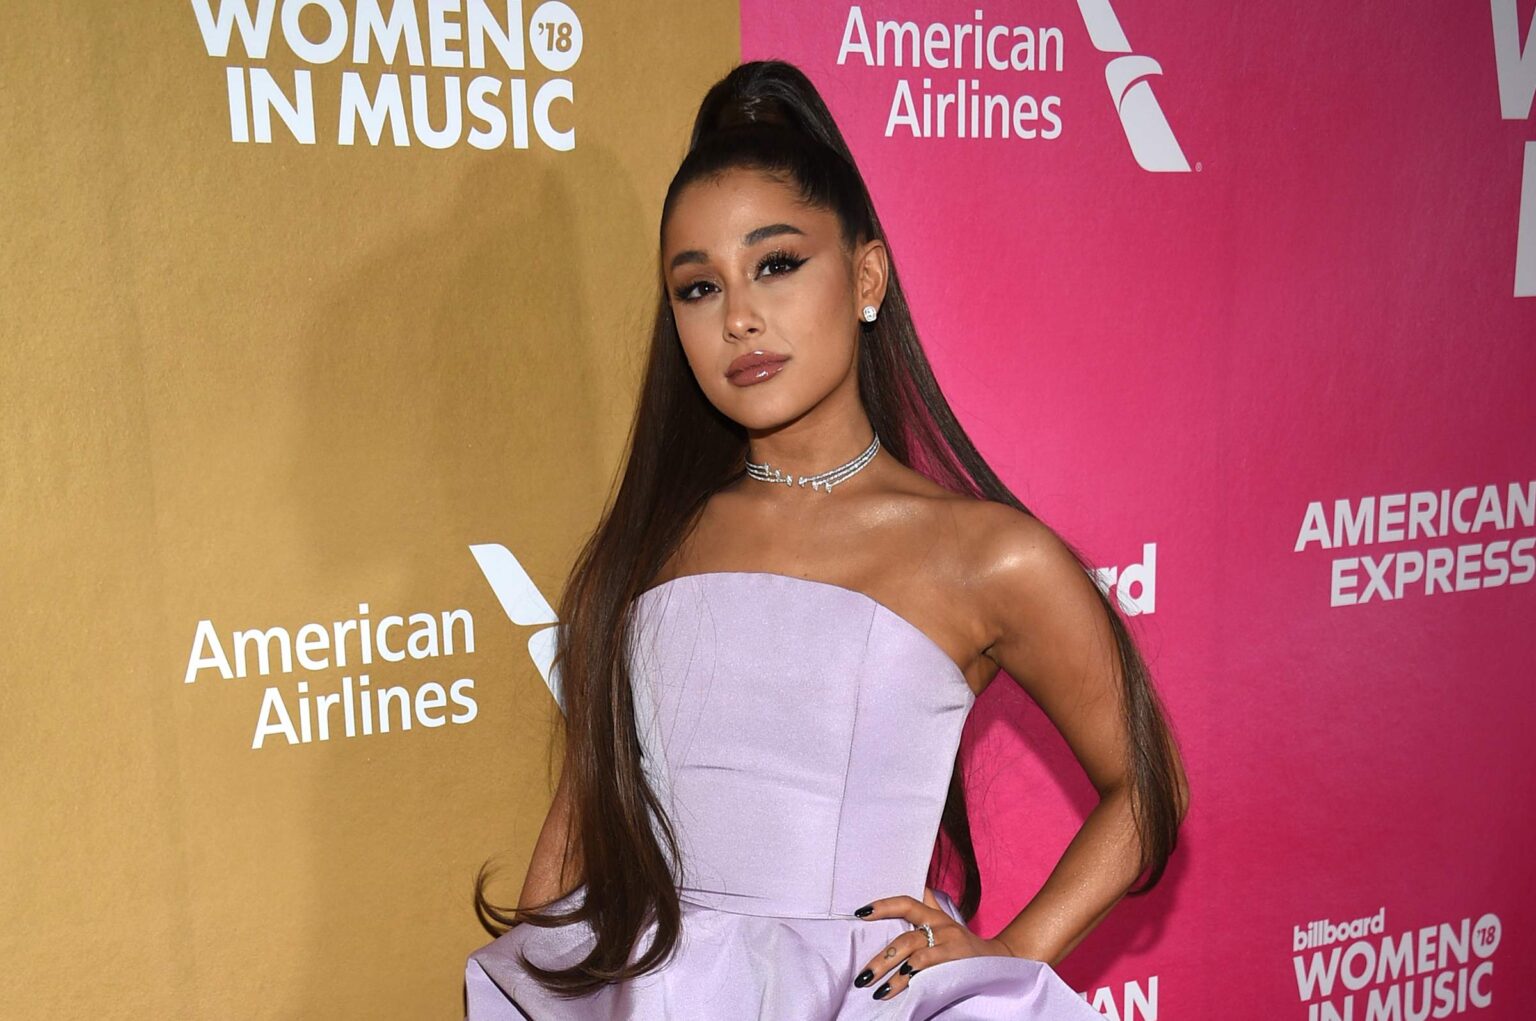 Ariana Grande has a new Netflix docuseries. Find out whether the singer's net worth was boosted by the Netflix deal.